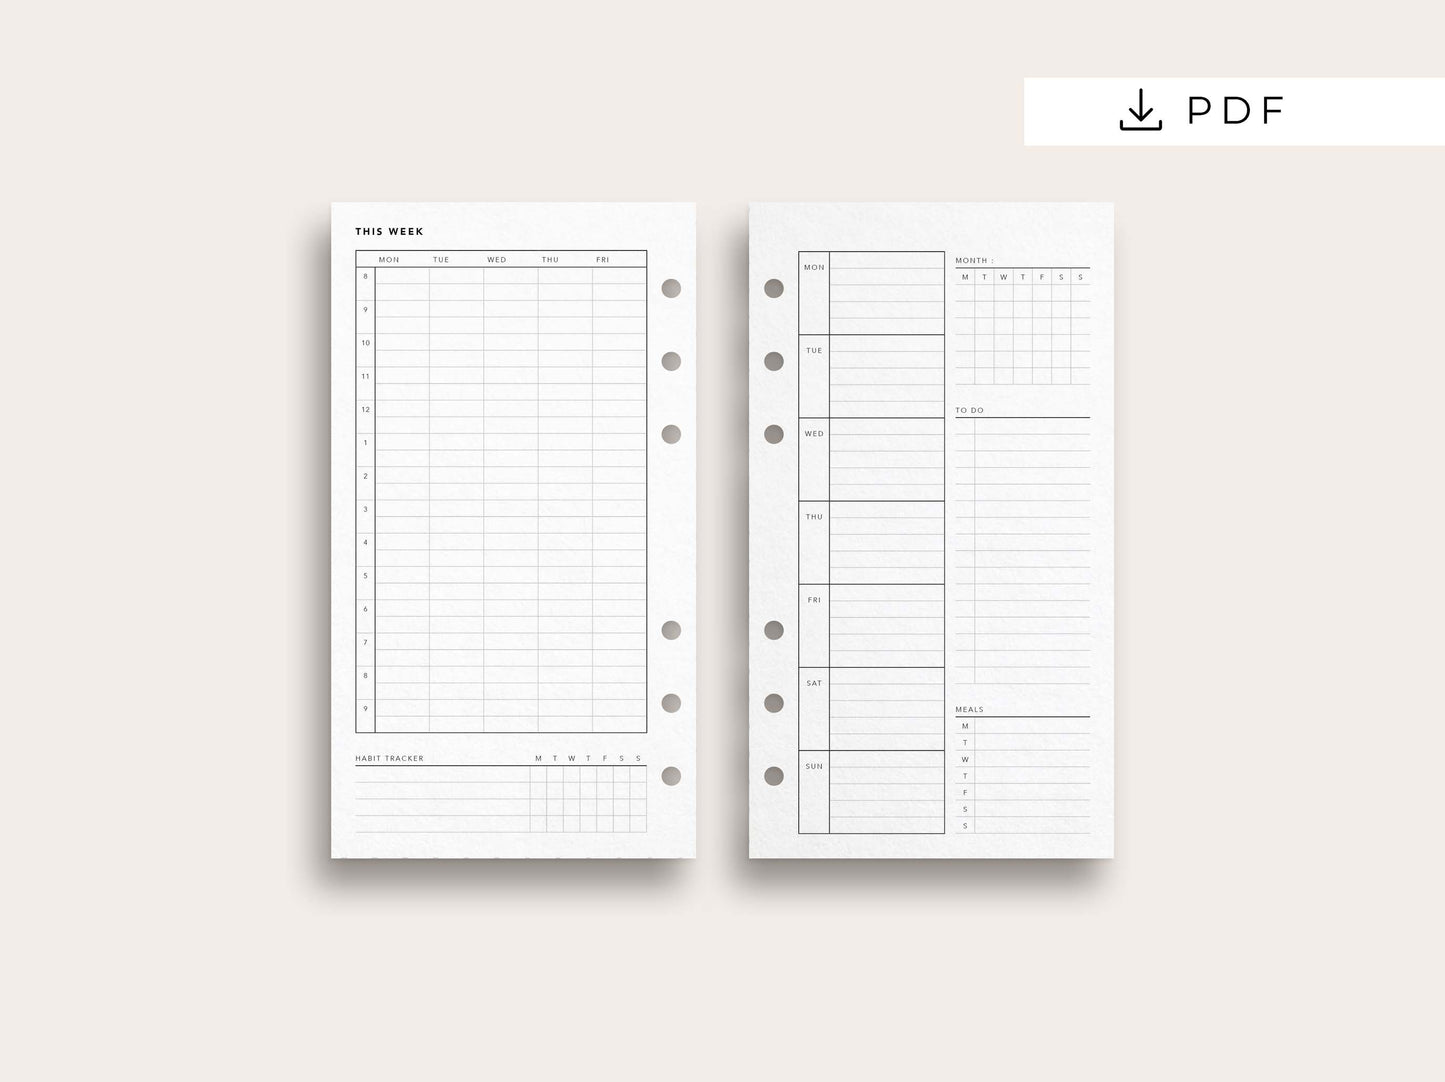 Designed By You 008: Weekly Planner